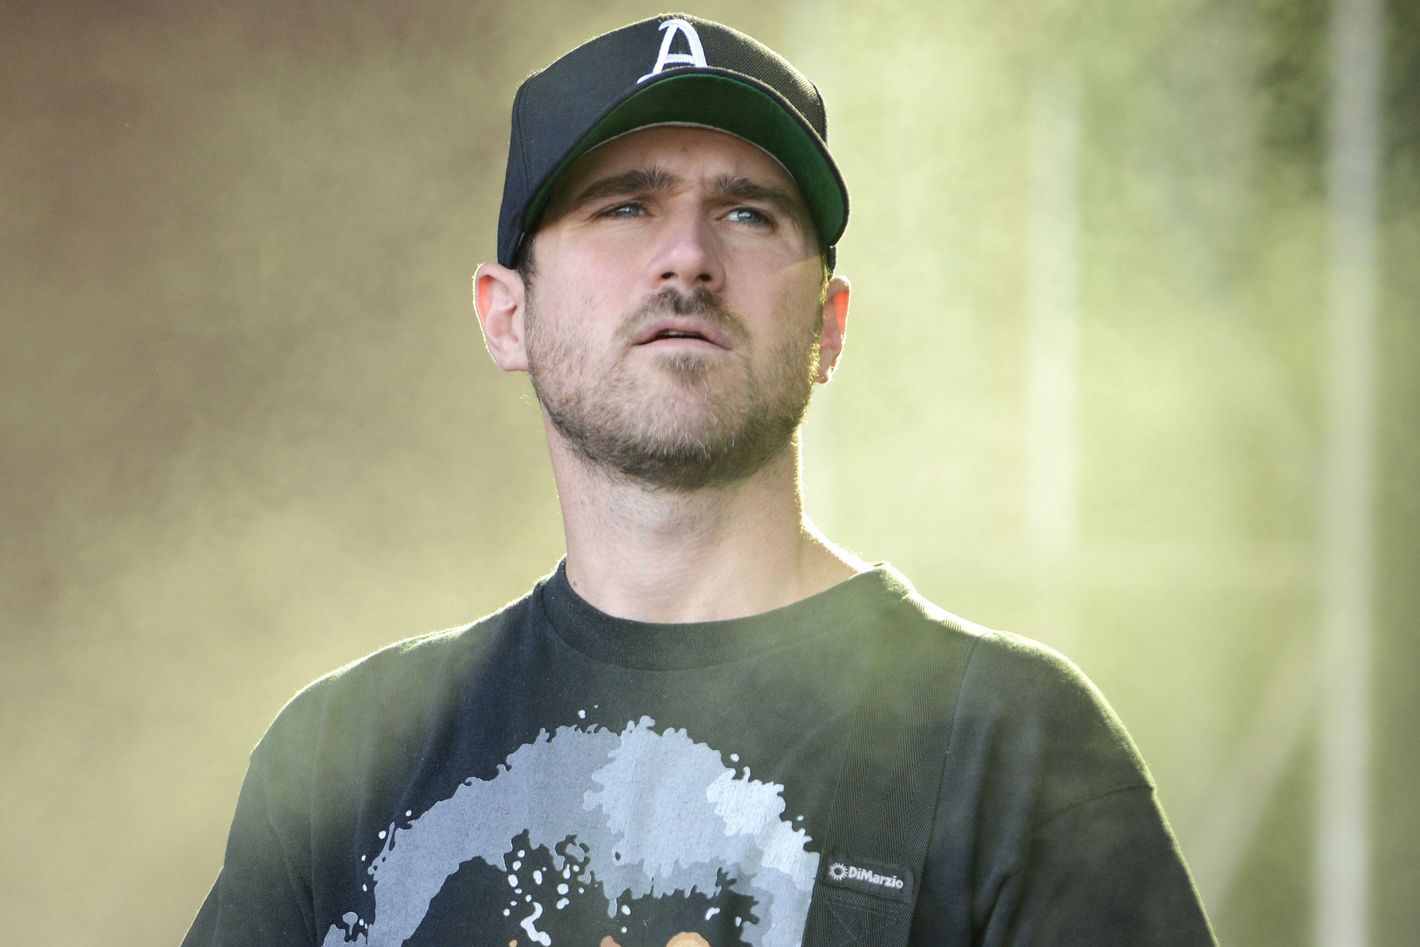 Jesse Lacey - Brand New  Jesse lacey, Lord help me, My favorite music